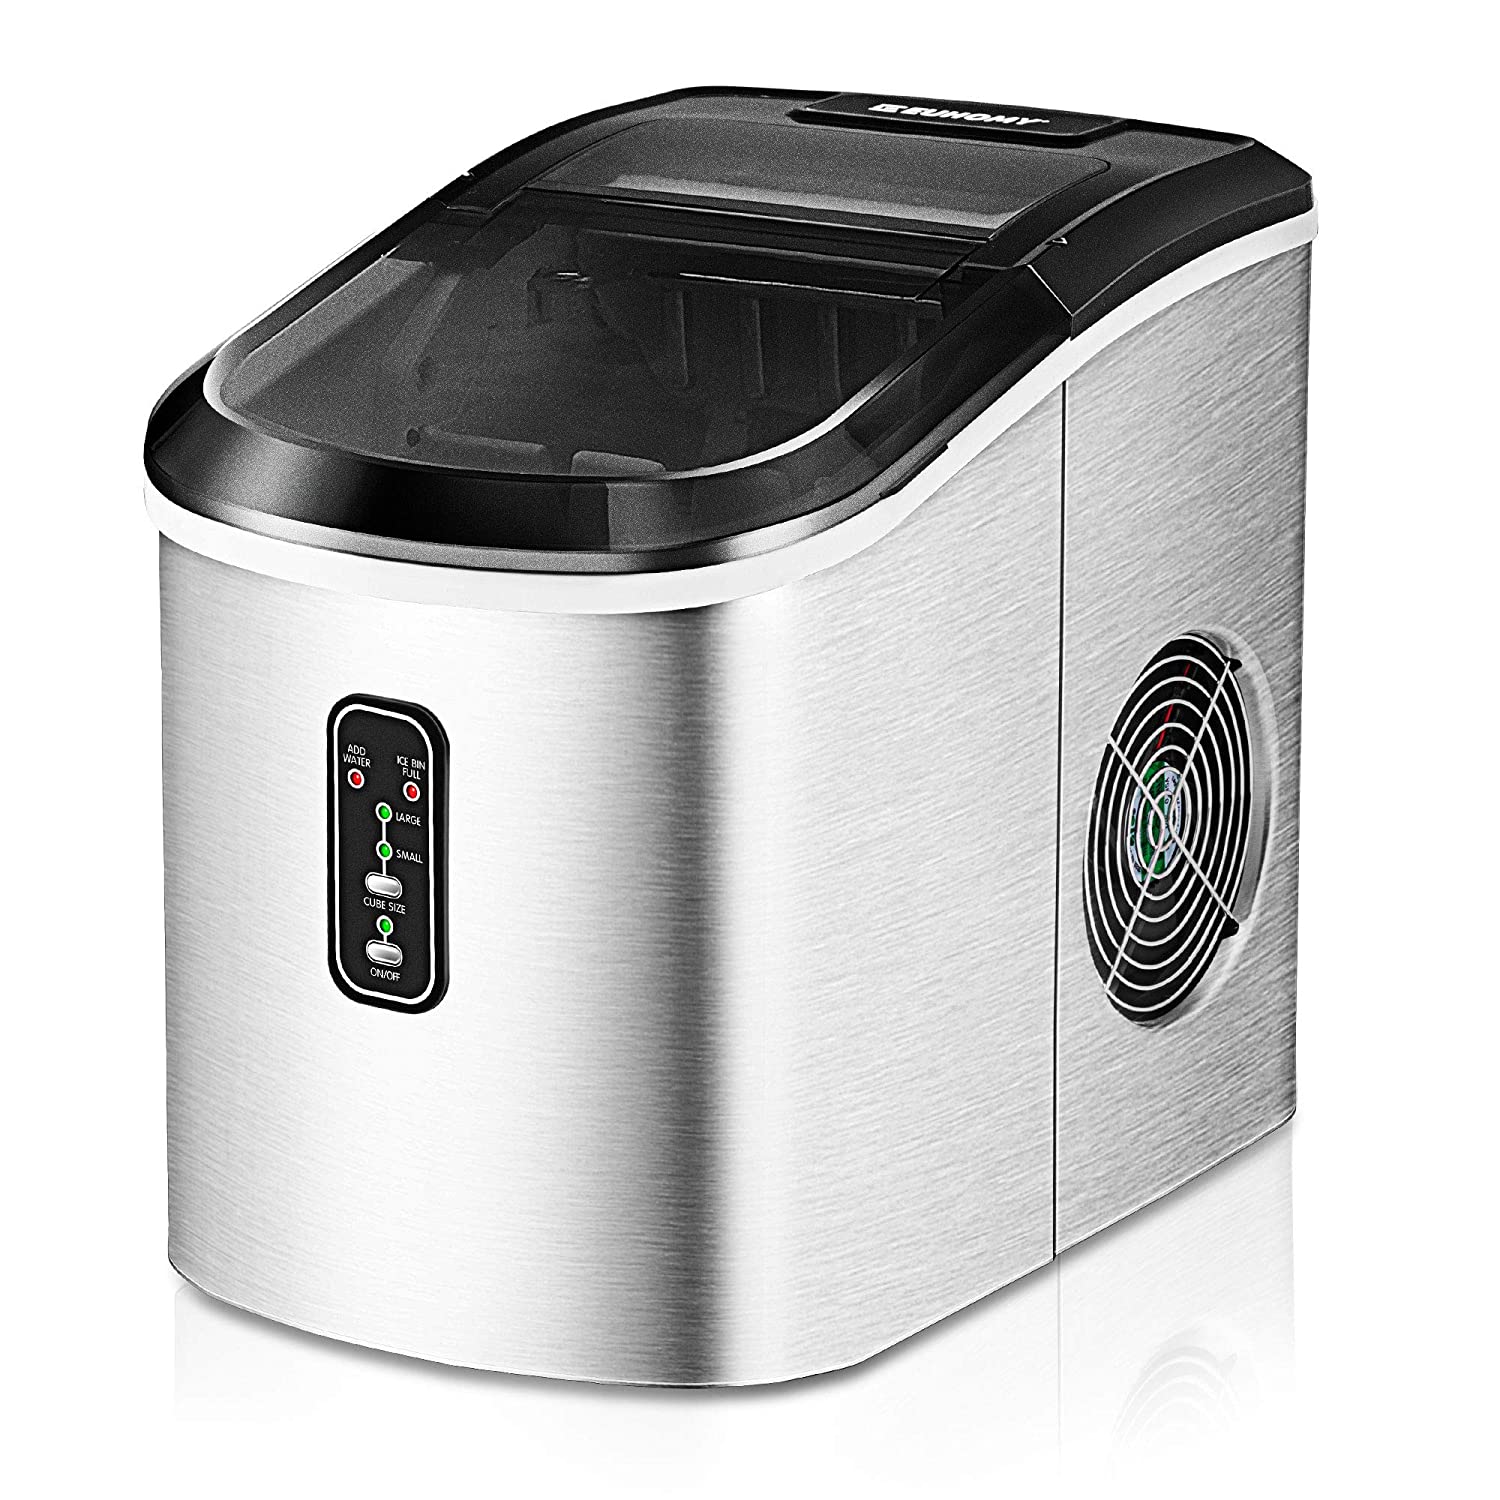 https://bigbigmart.com/wp-content/uploads/2023/05/EUHOMY-Ice-Maker-Machine-Countertop-26-lbs-in-24-Hours-9-Cubes-Ready-in-8-Mins-Electric-ice-Maker-and-Compact-Potable-ice-Maker-with-Ice-Scoop-and-Basket.-Perfect-for-Home-Kitchen-Office.Sliver.jpg